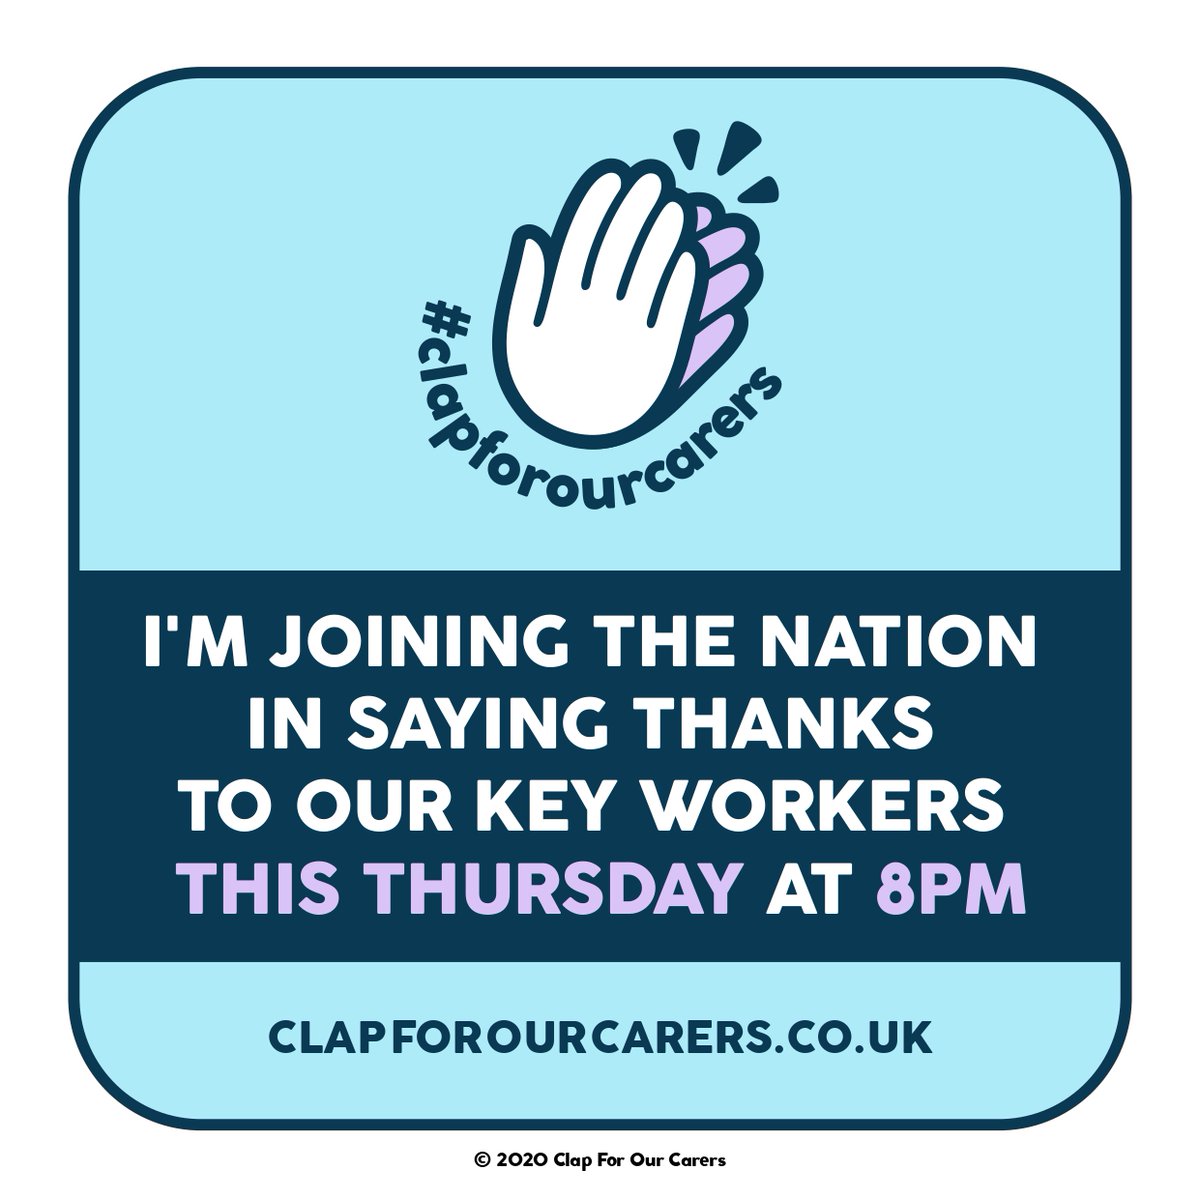 8:00PM Pause your film for a short intermission. In the UK at 8PM on Thursdays many people stop what they’re doing and show their support for the people caring for us during this pandemic by giving a  #ClapForOurCarers 